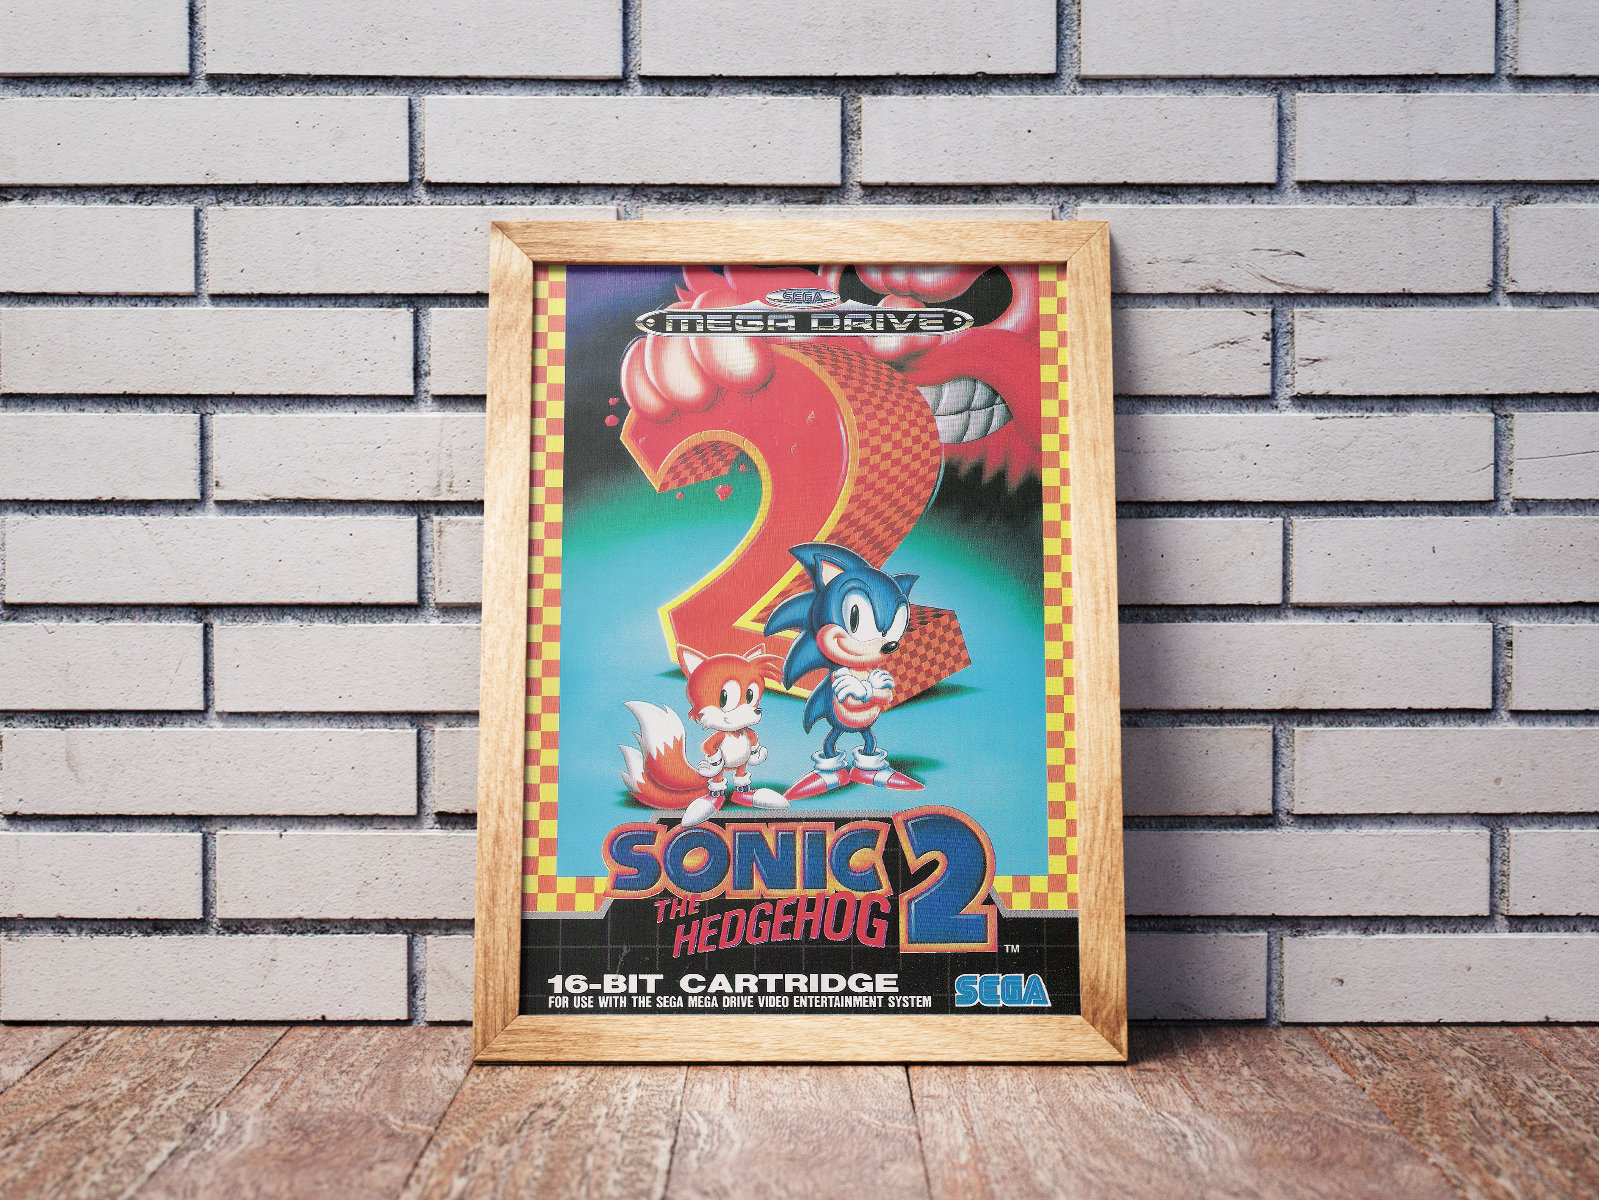 Sonic The Hedgehog 2 Movie Poster 18'' X 28'' ID-75-2